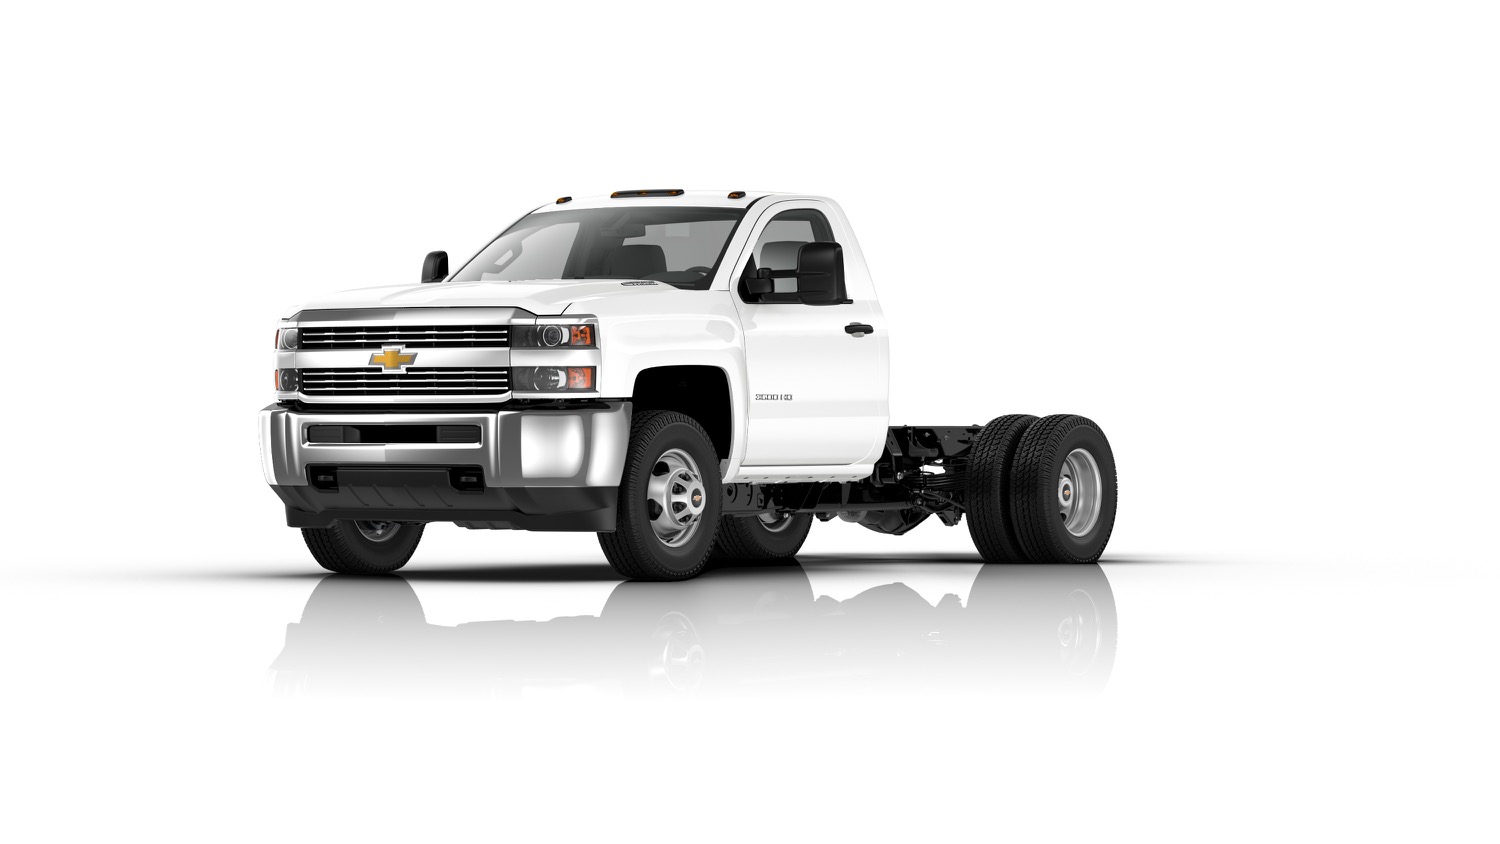 2016 Chevrolet Silverado Hd Lineup Adds Tough New Towing Features Gm